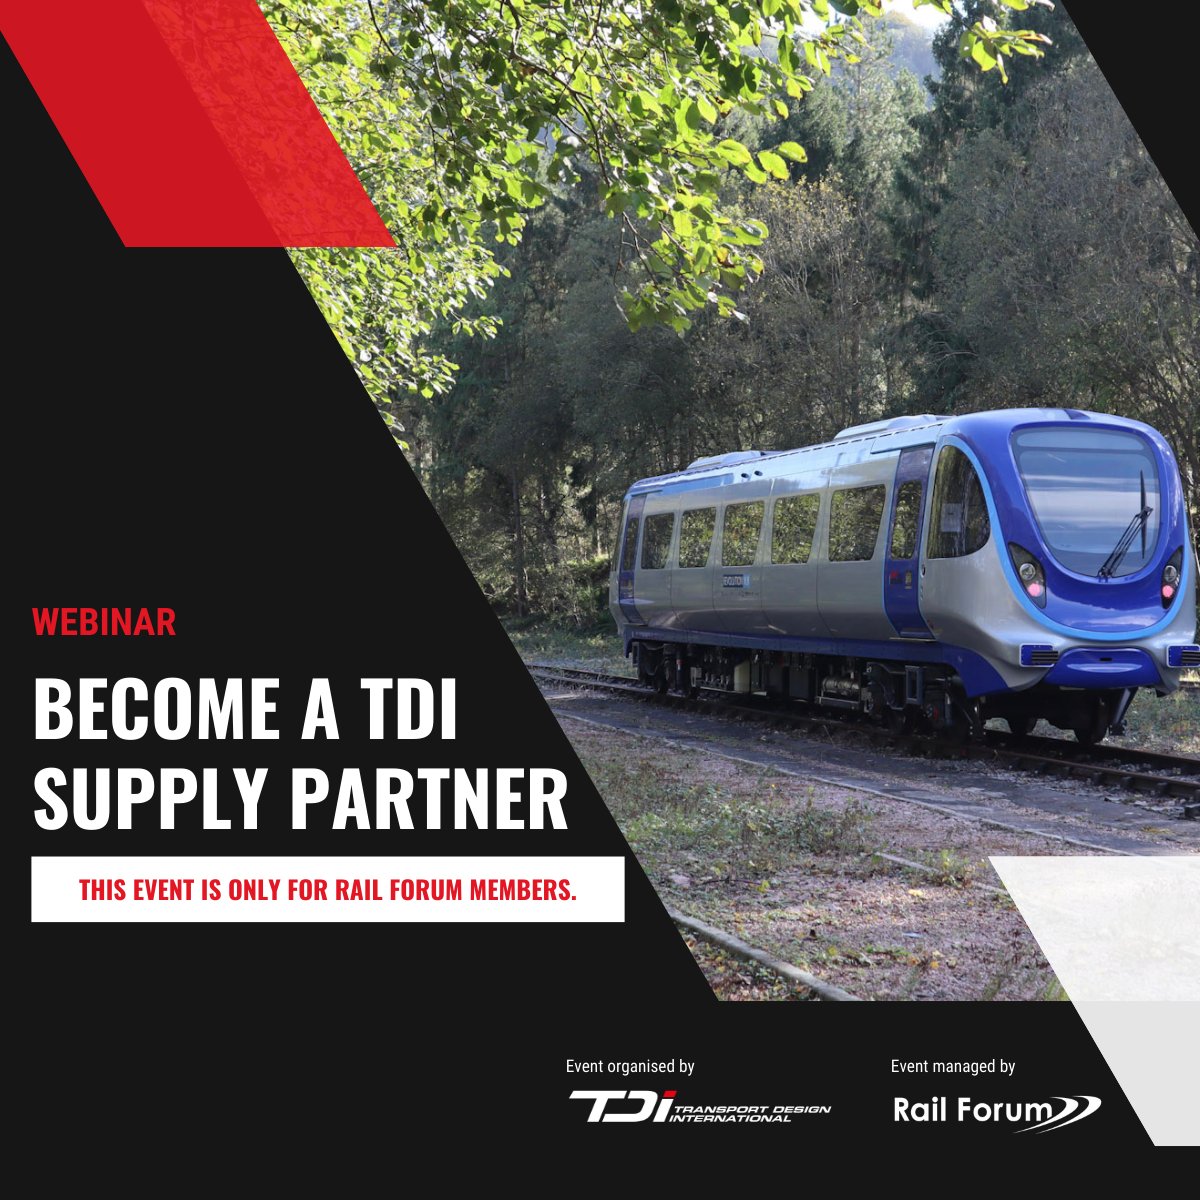 @tdi_transport is delighted to announce that we will be hosting a supplier webinar for @railforum_uk members (invite only)! Learn more about our growth plans and what we are looking for in our supply chain partners - transportdesigninternational.com/you-can-be-tdi… #RVLR #VeryLightRail #SupplyChain